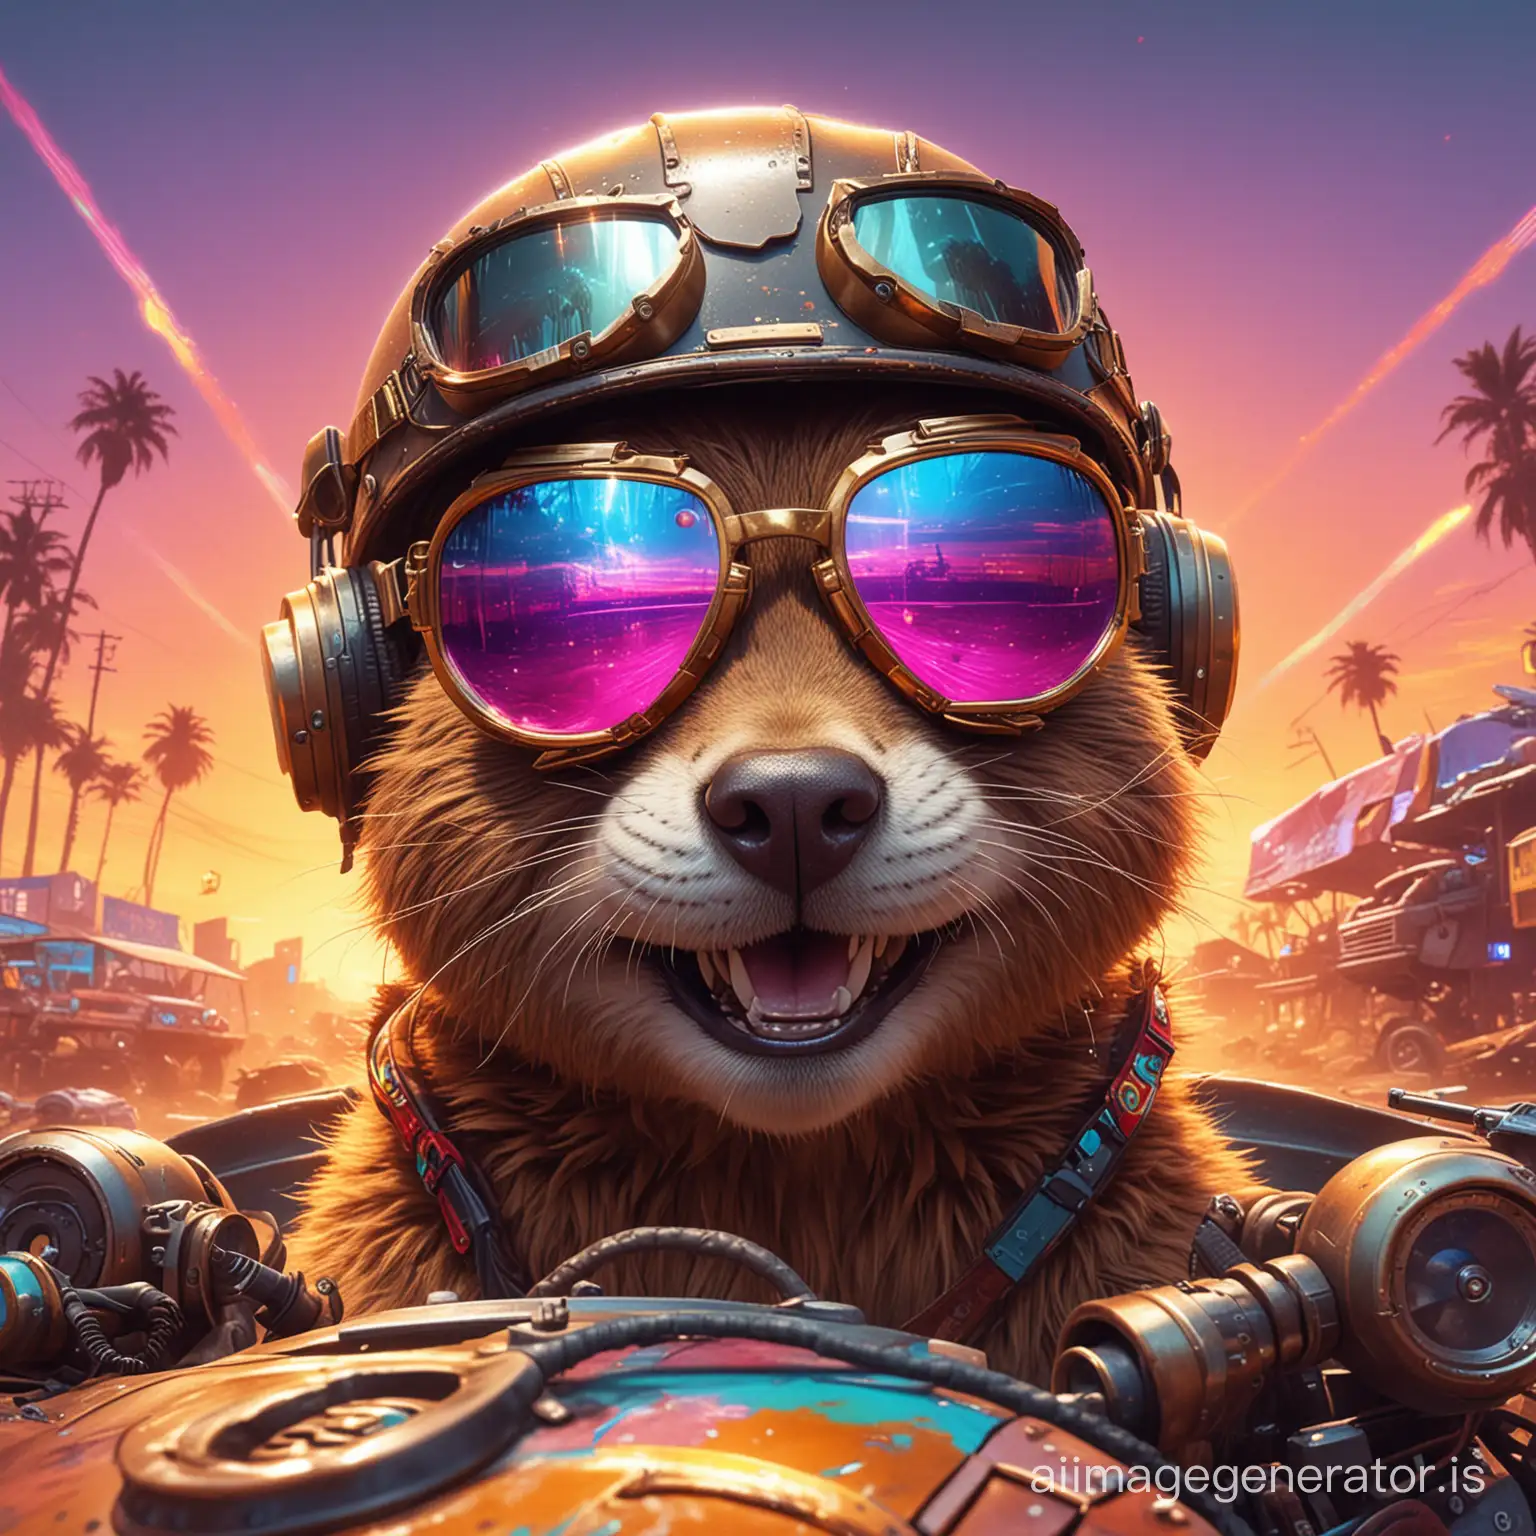 beaver, derailed fur, disco  synthwave, Blade of technology, white teeth grinning, gramophone, colorful,  bronze, helmet, detailed  retro racer goggles, psychedelic madness at background, cyberpunk